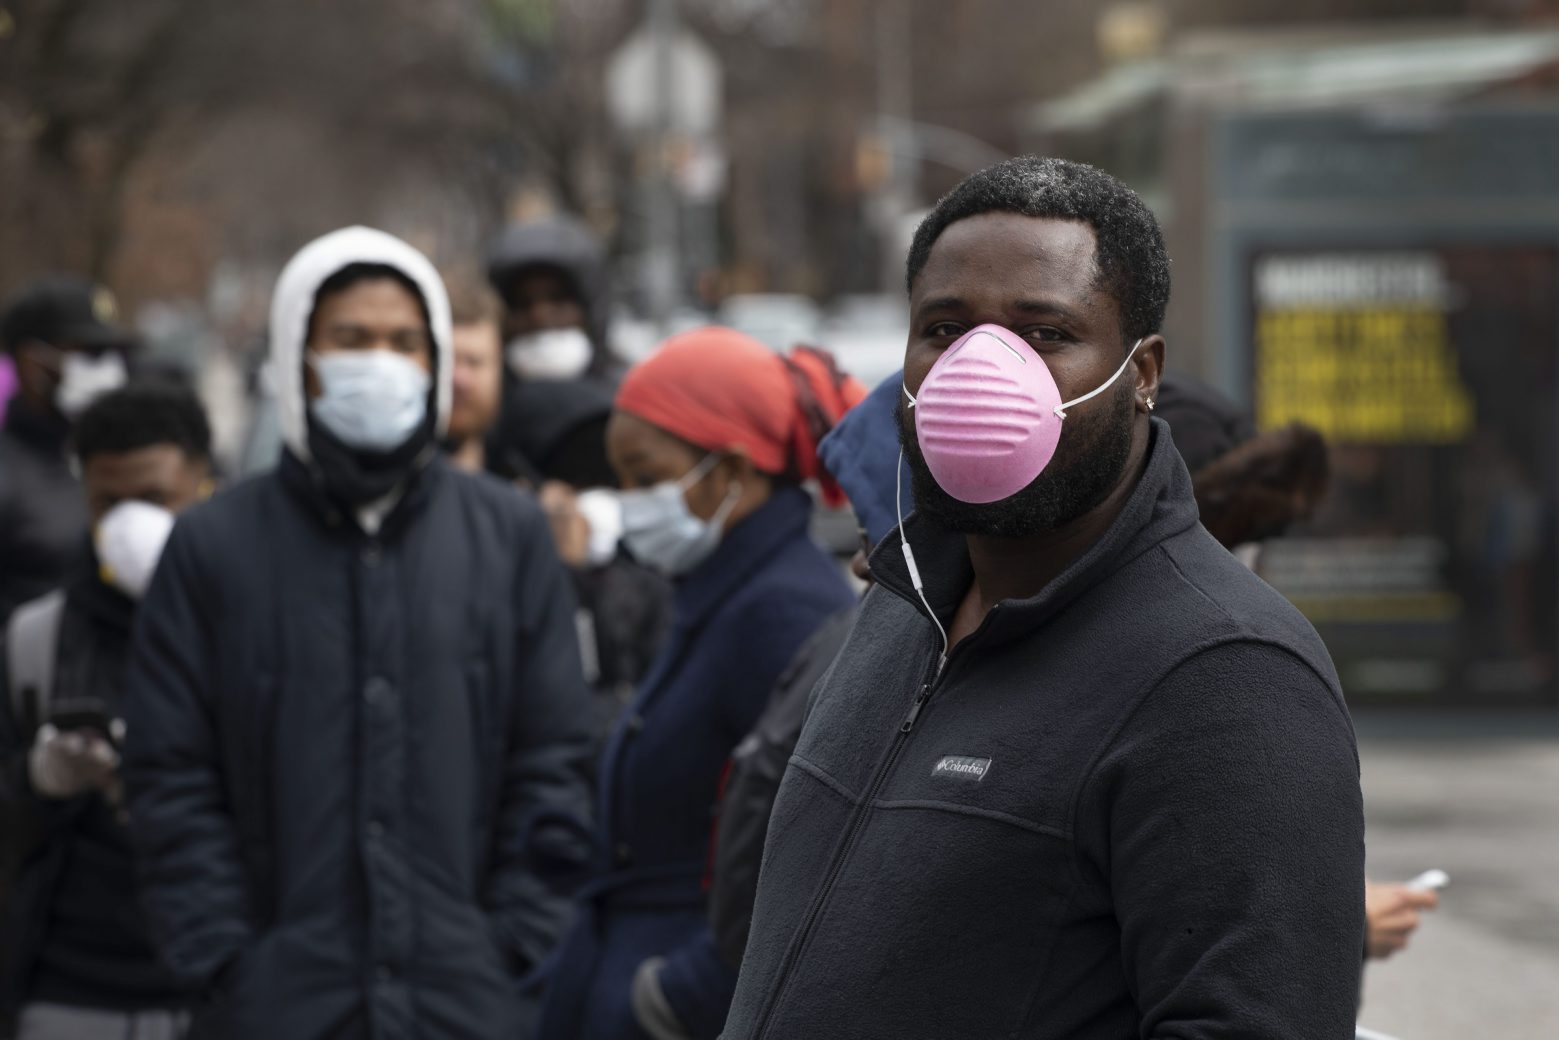 David Cadet, right, waits in line outside a coronavirus screening tent at the Brooklyn Hospital Center, Thursday, March 19, 2020 in New York. Cadet does not think he has the virus but is having a screening just in case. "You have to protect them," he says of his wife and child. (AP Photo/Mark Lennihan) Virus Outbreak New York